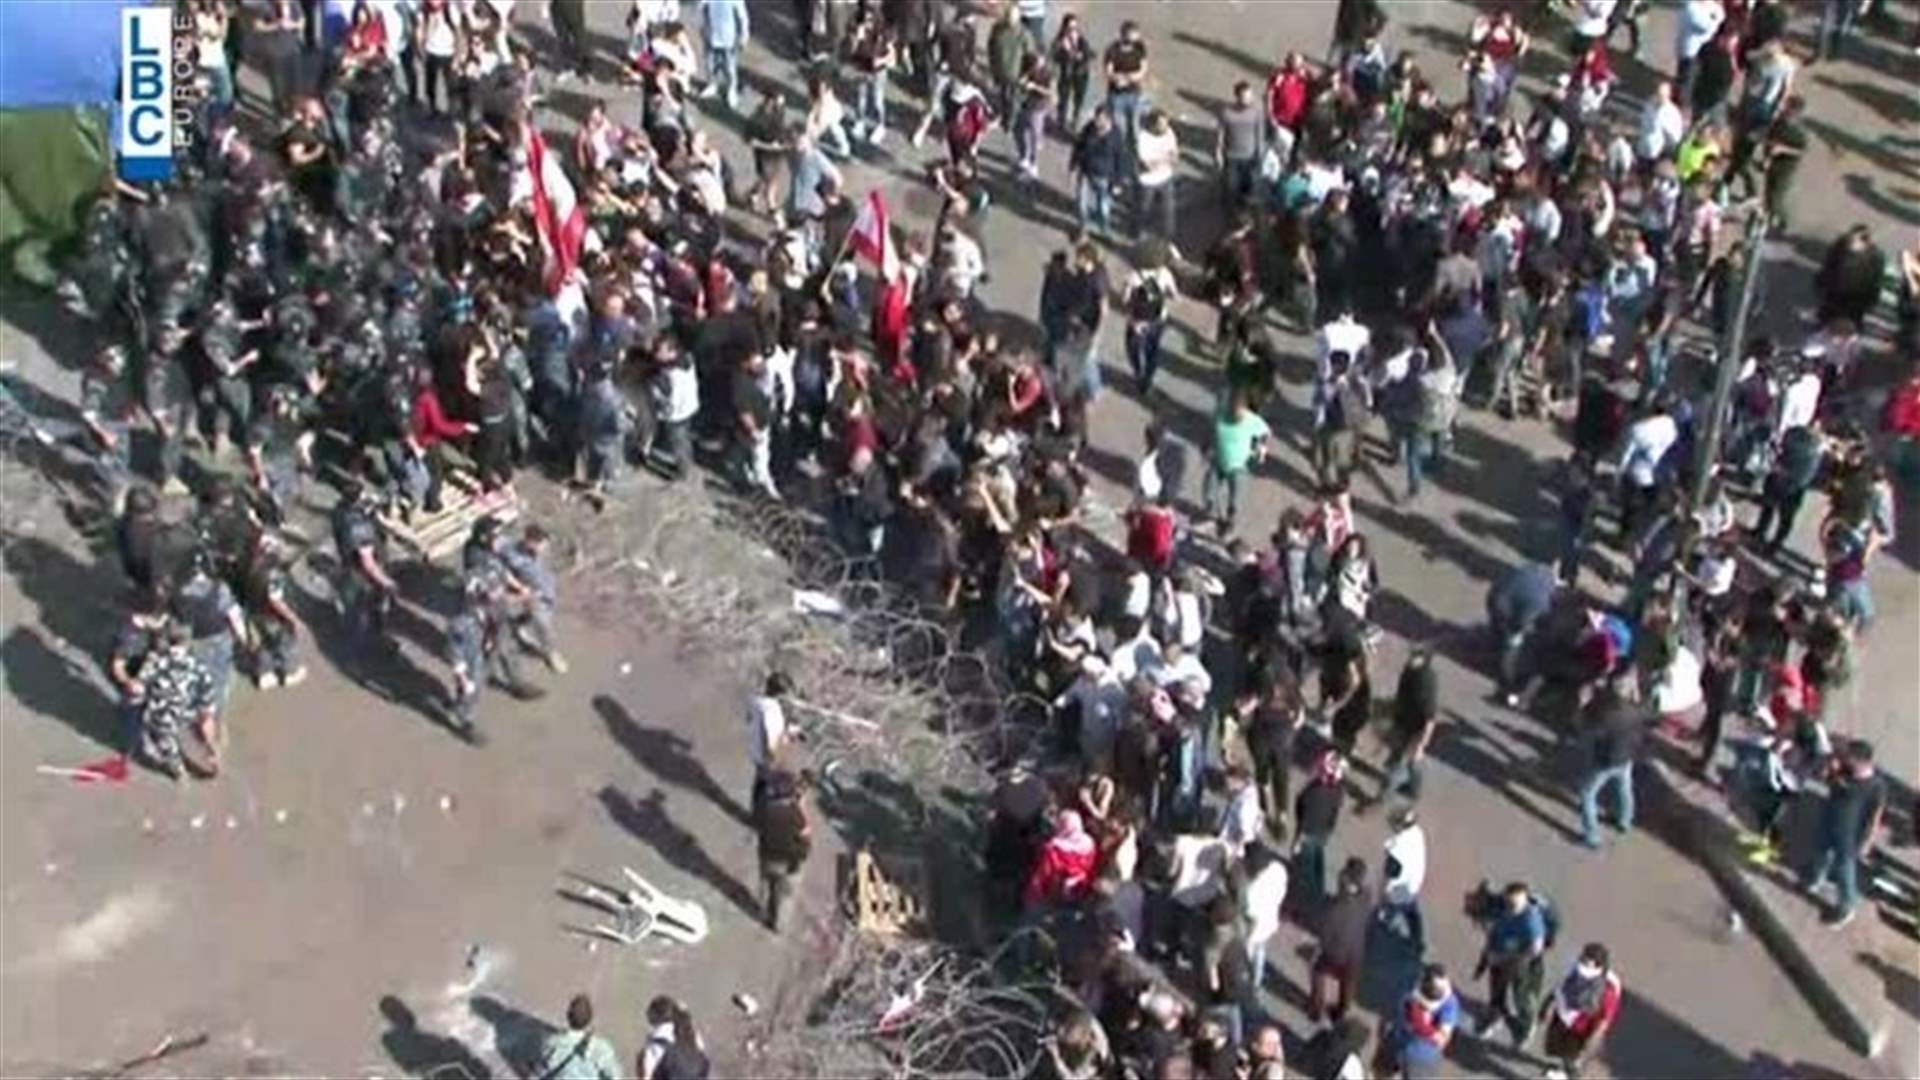 Clashes erupt between protesters and security forces in Riad al-Solh (Video)